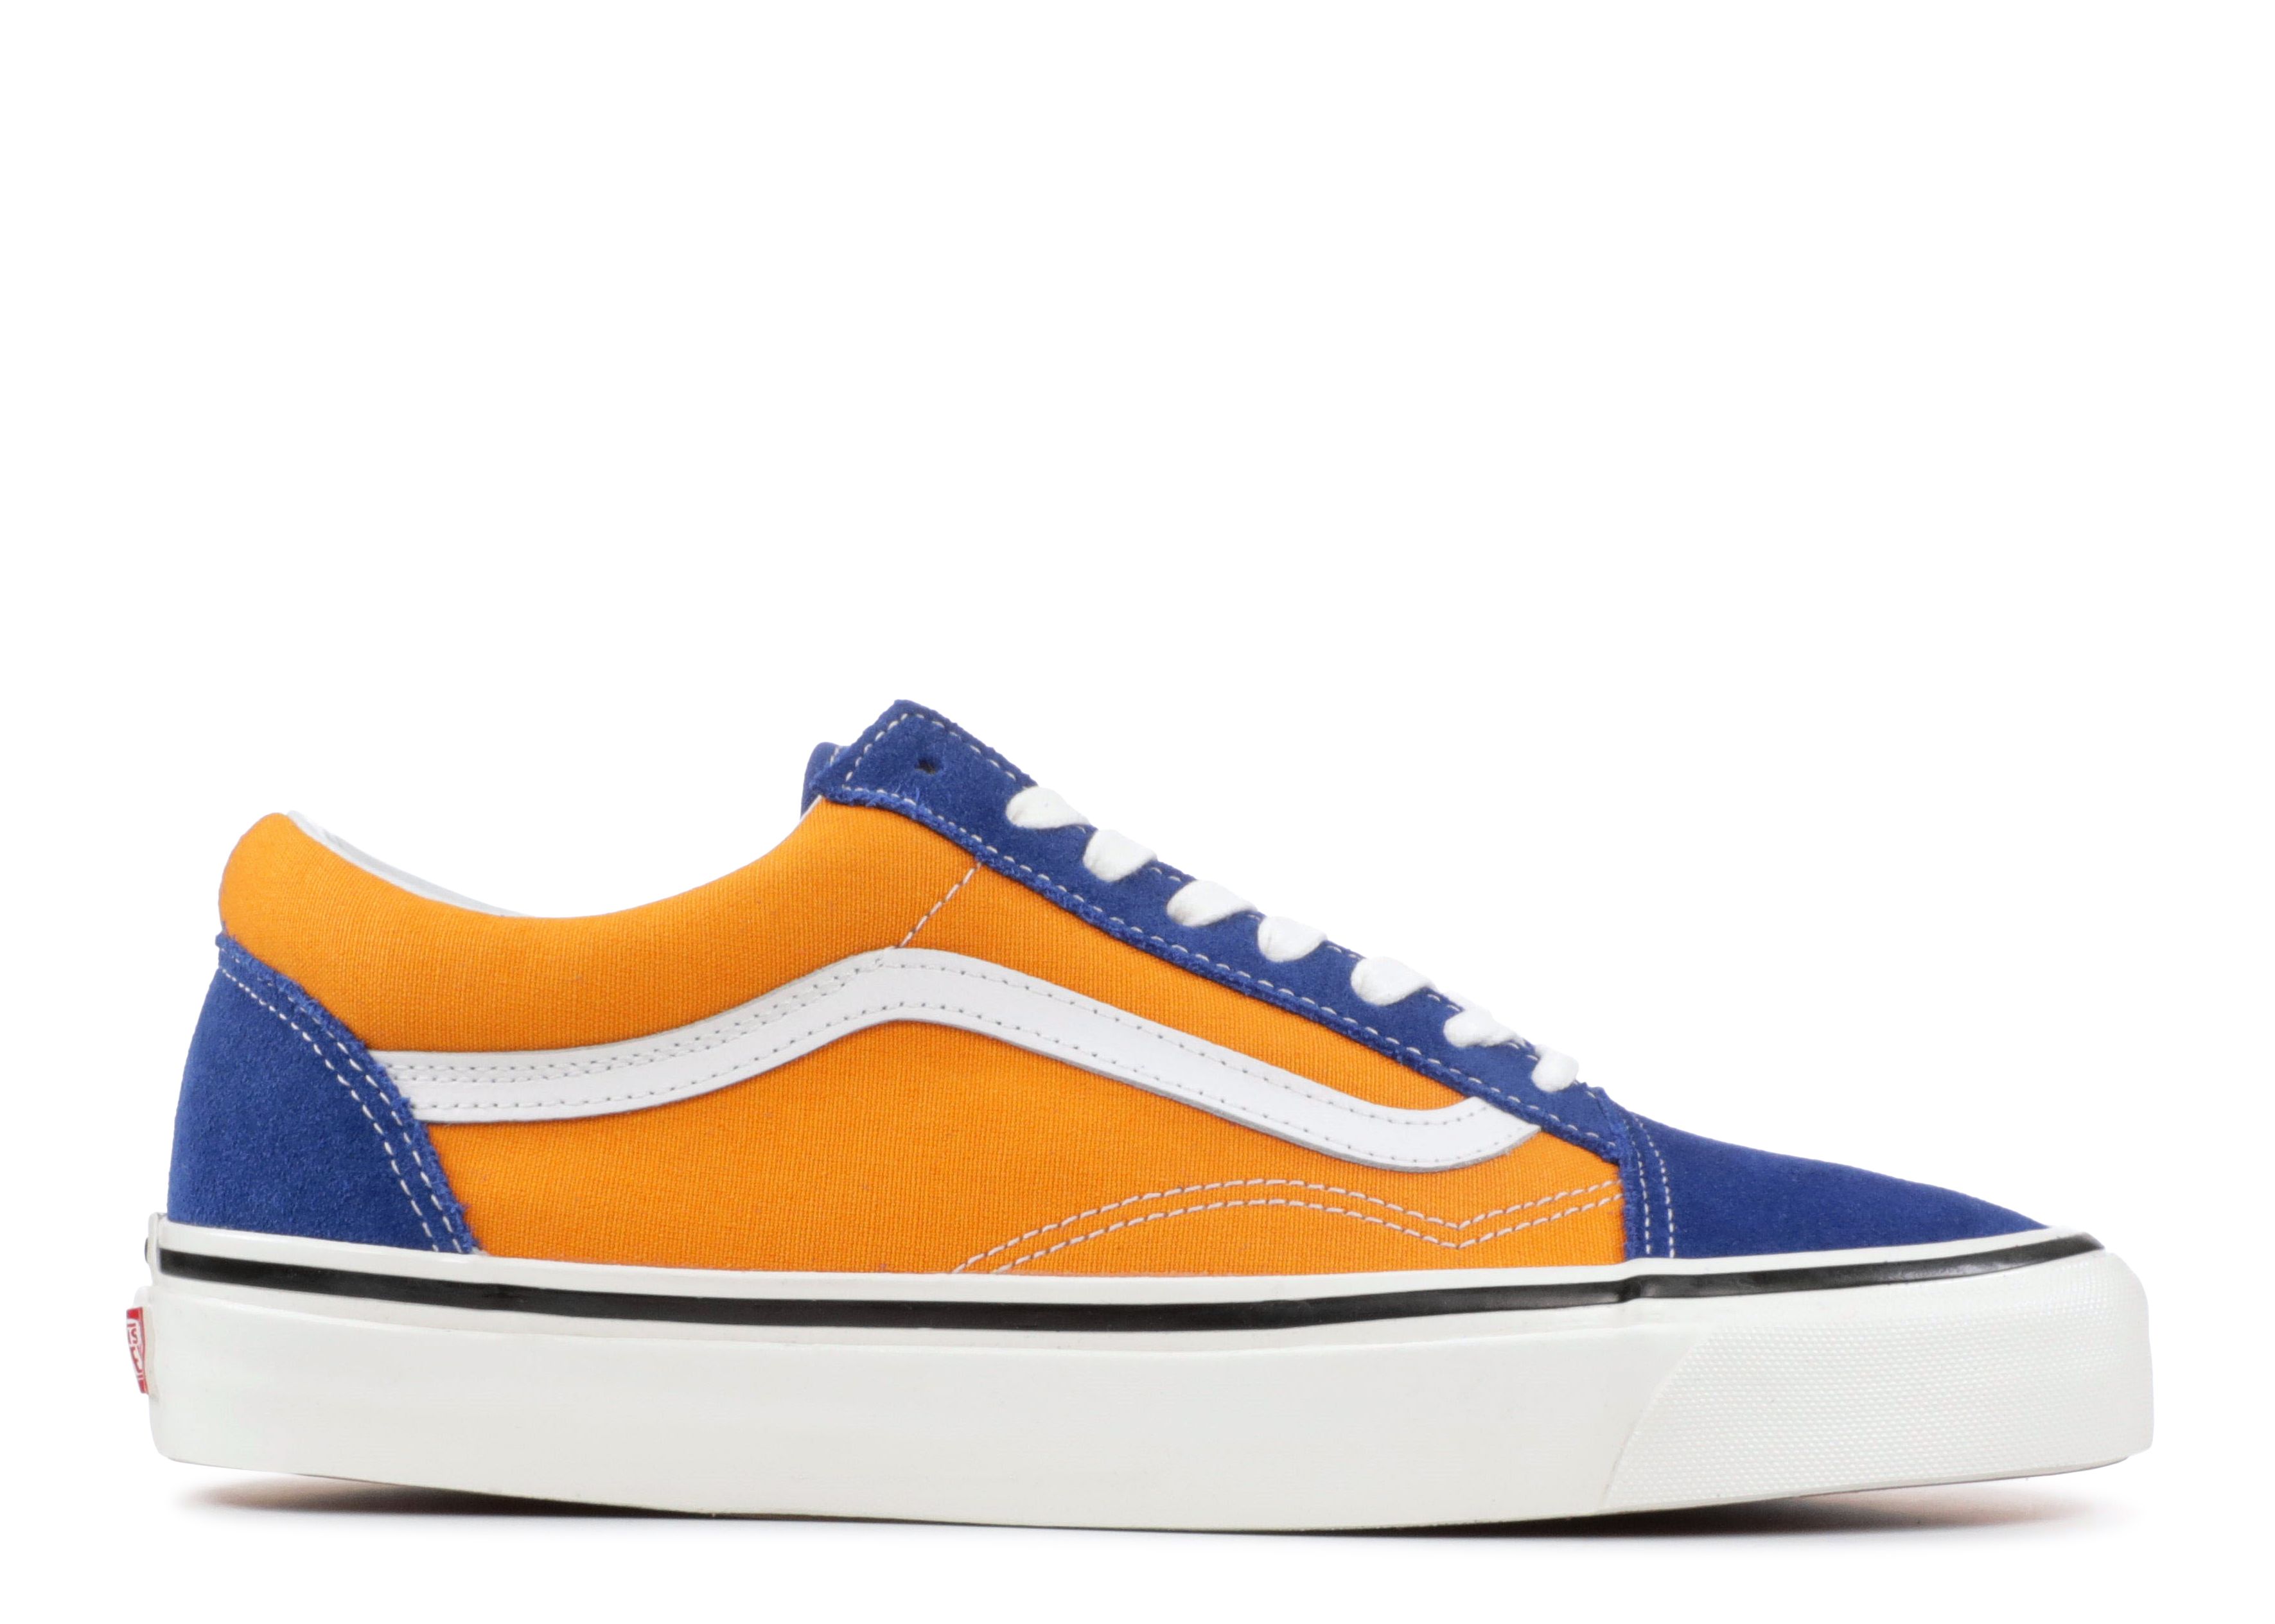 vans old skool yellow and blue cheap online